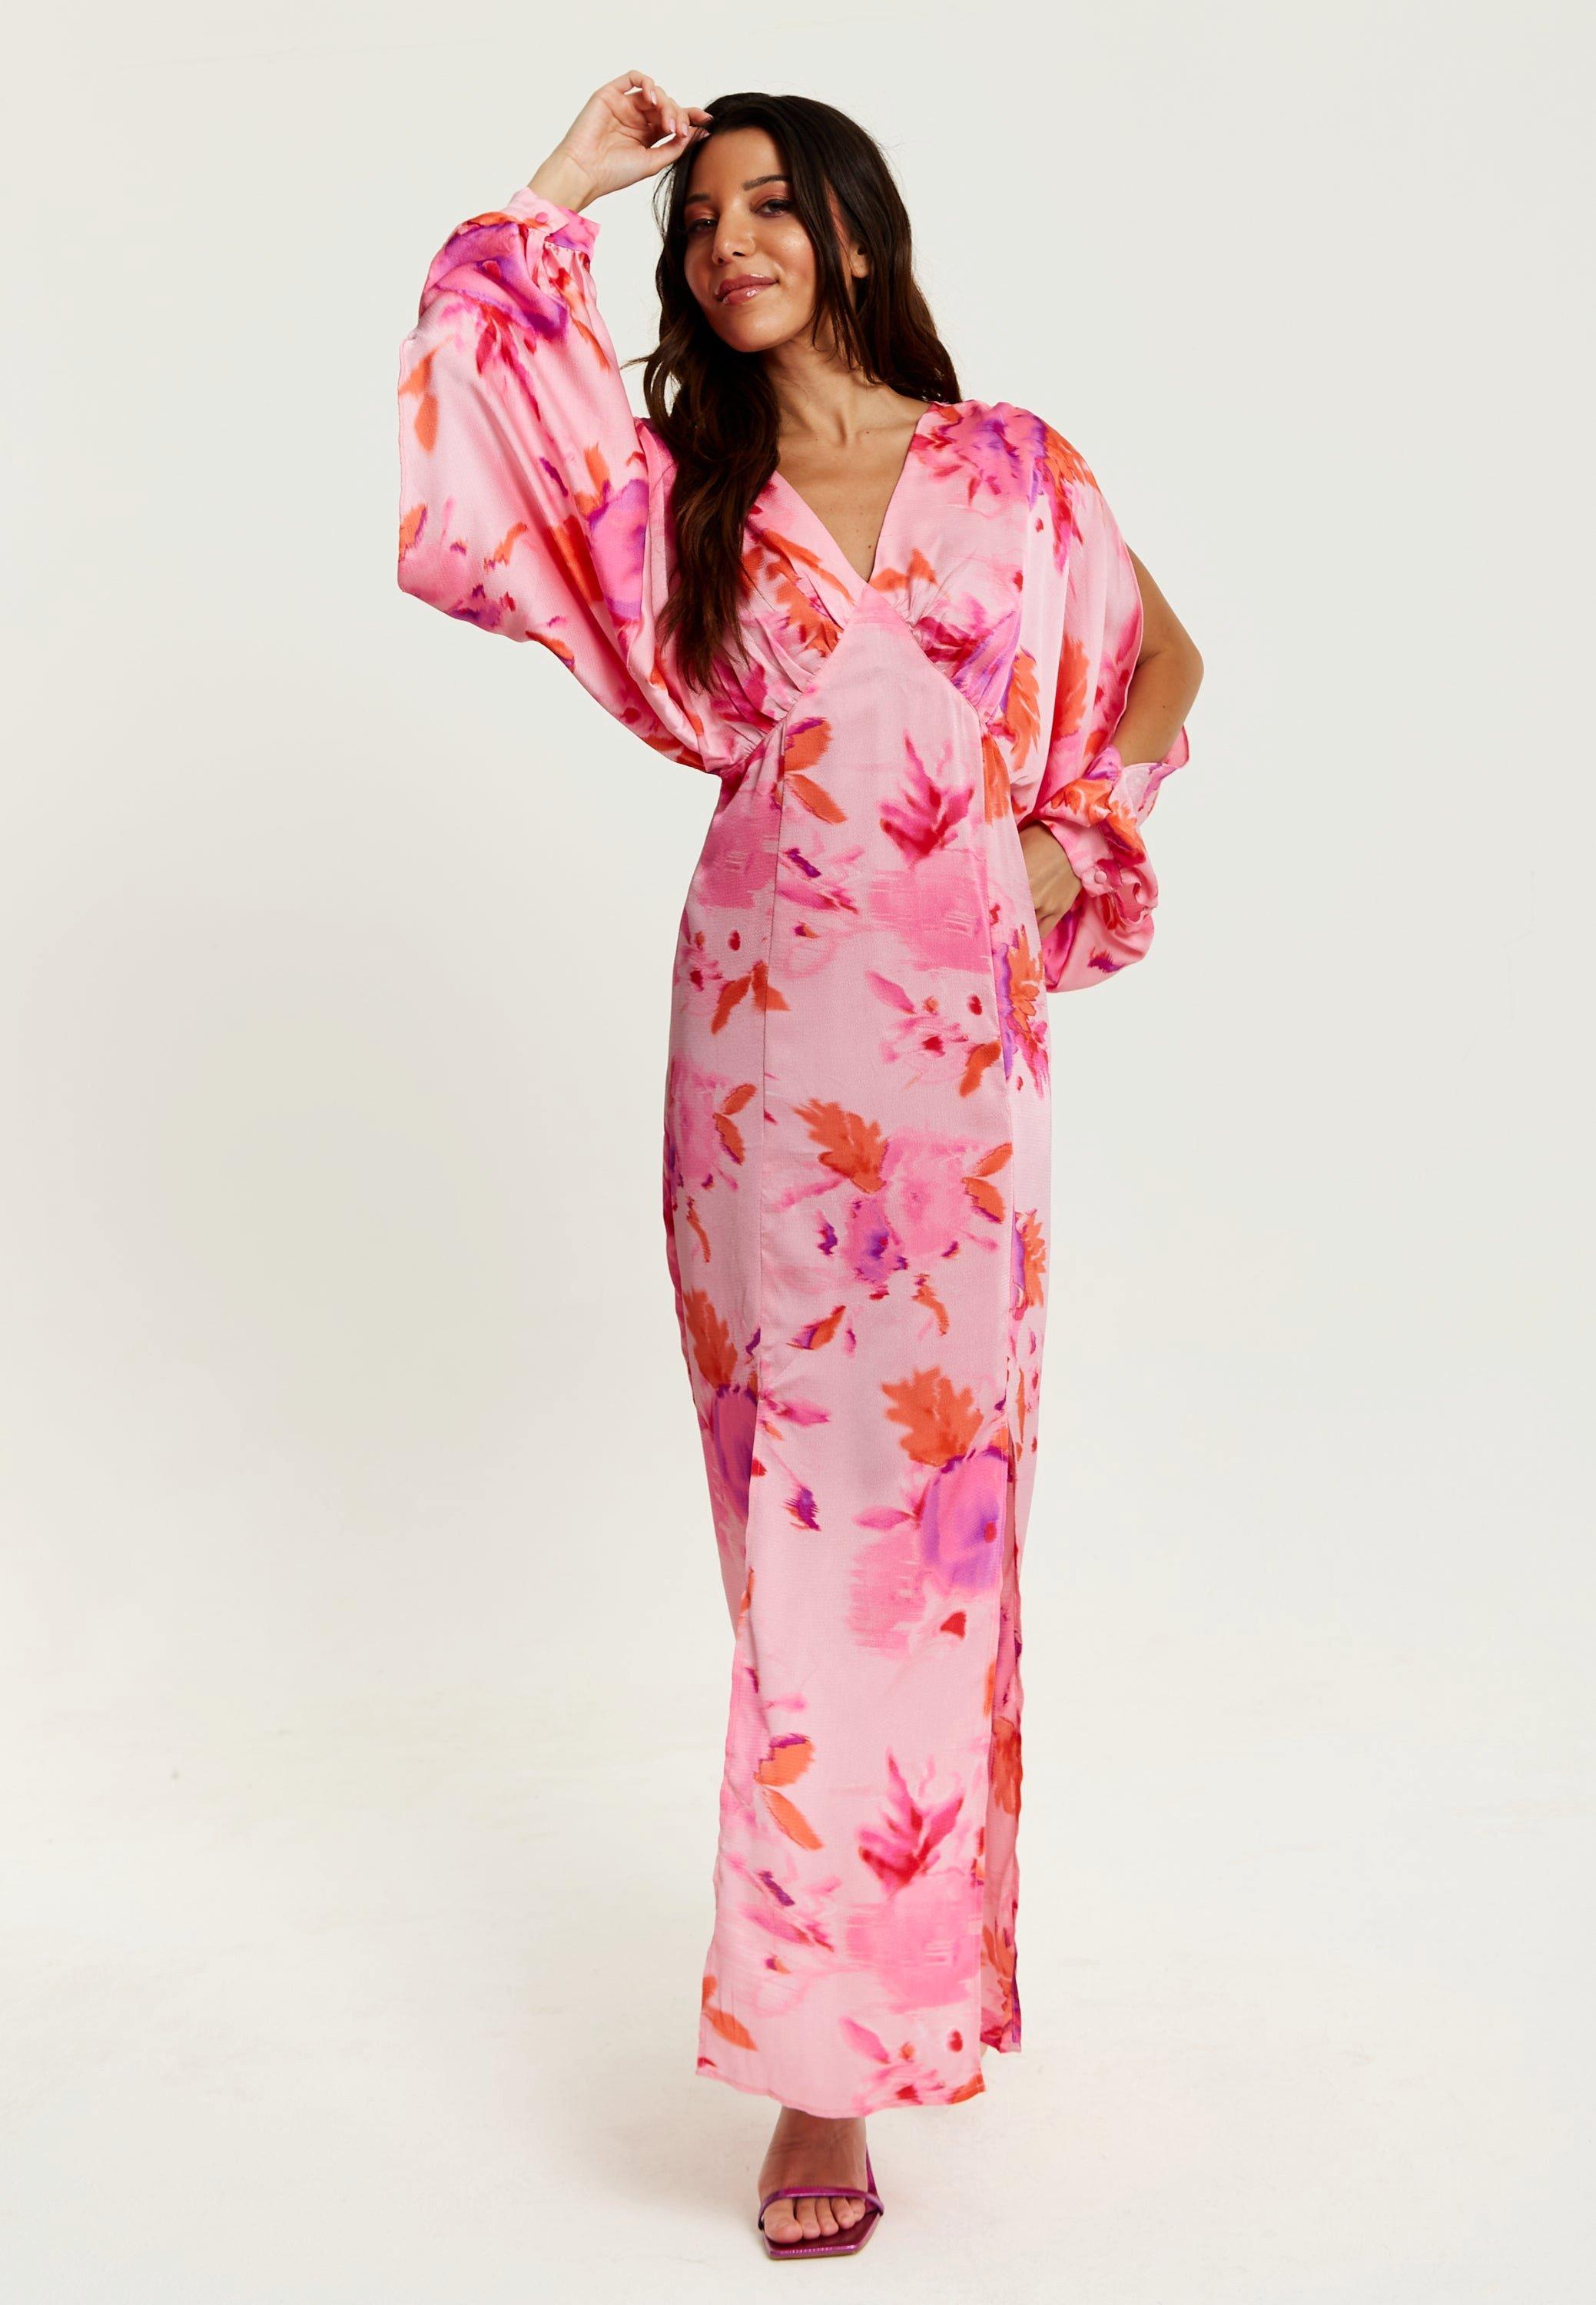 Floral Print Maxi Dress In Pink With Sleeve Slits